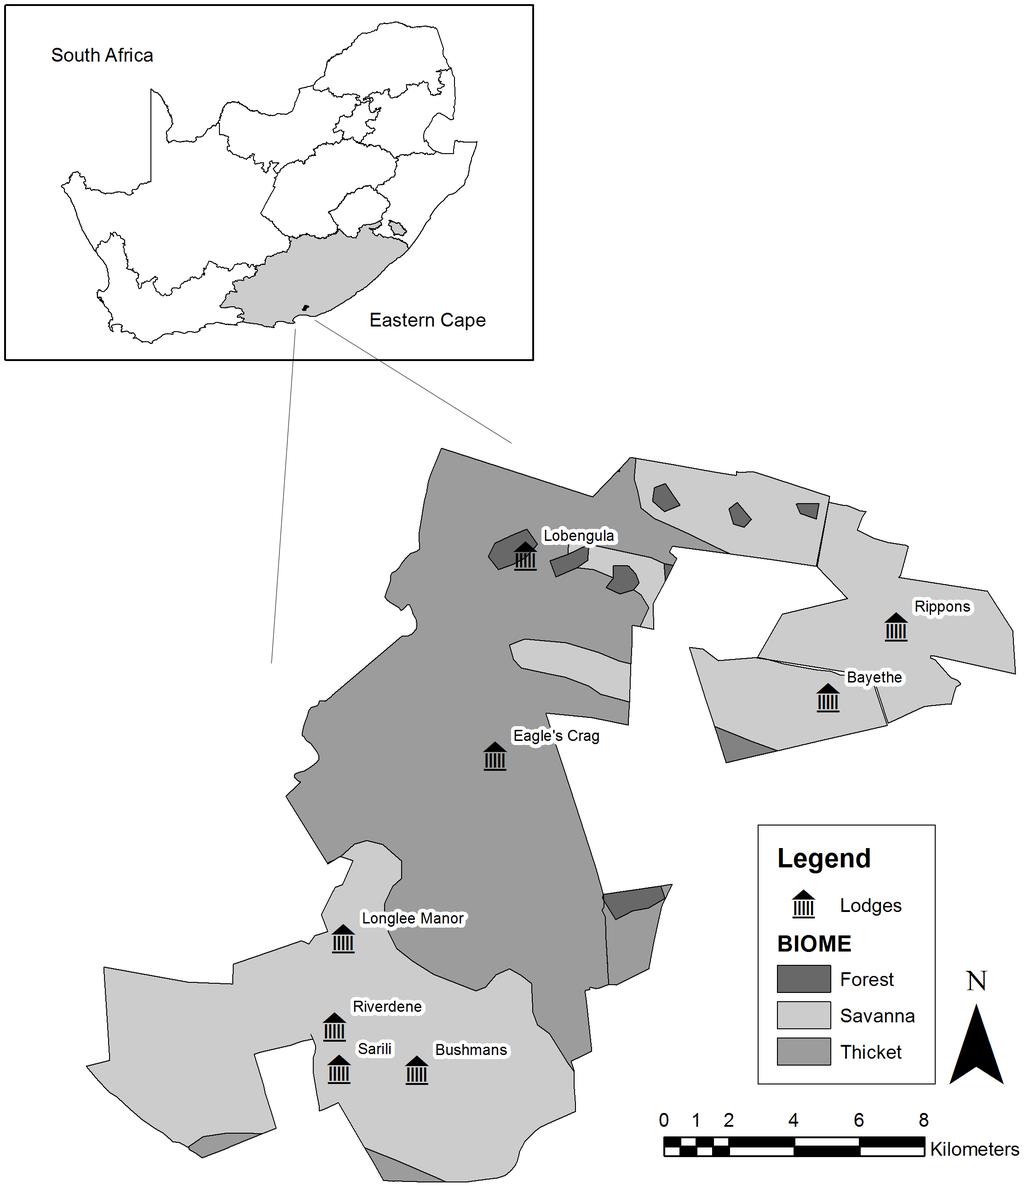 Figure 1. The location of Shamwari Private Game Reserve, in the Eastern Cape Province of South Africa, and the different biome types and lodges. doi:10.1371/journal.pone.0088192.